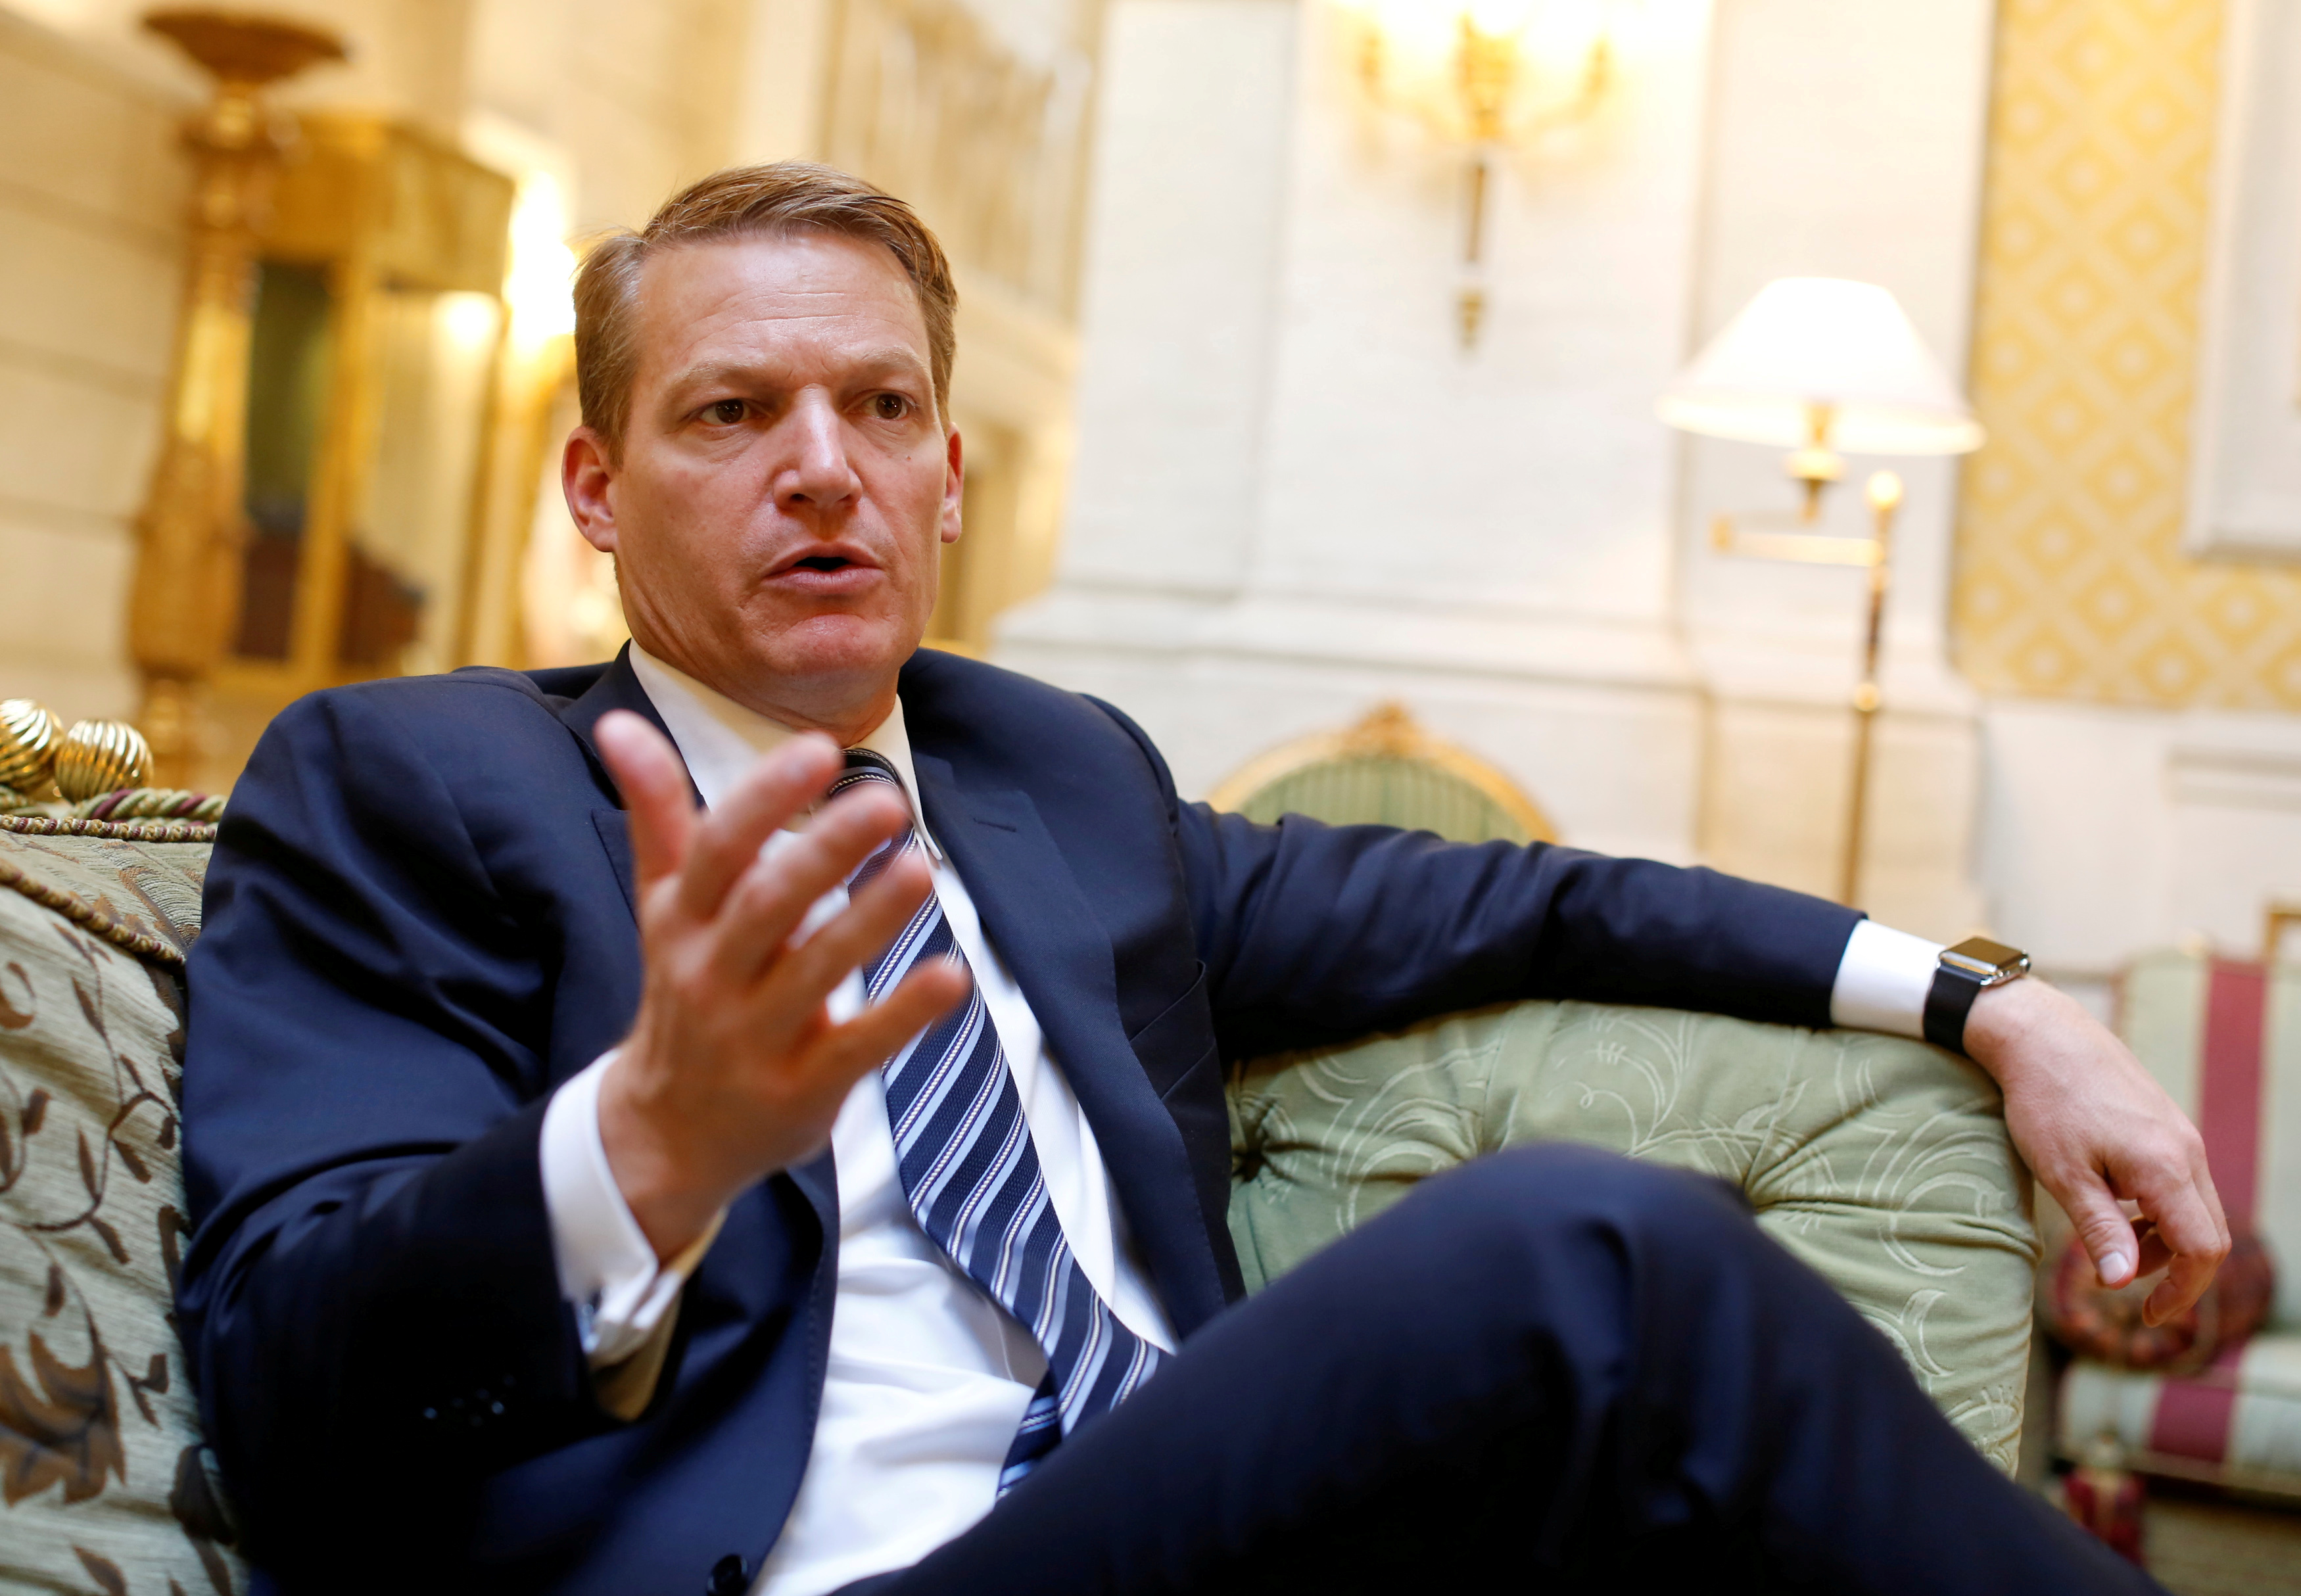 FireEye CEO Kevin Mandia is seen during an interview in Rome